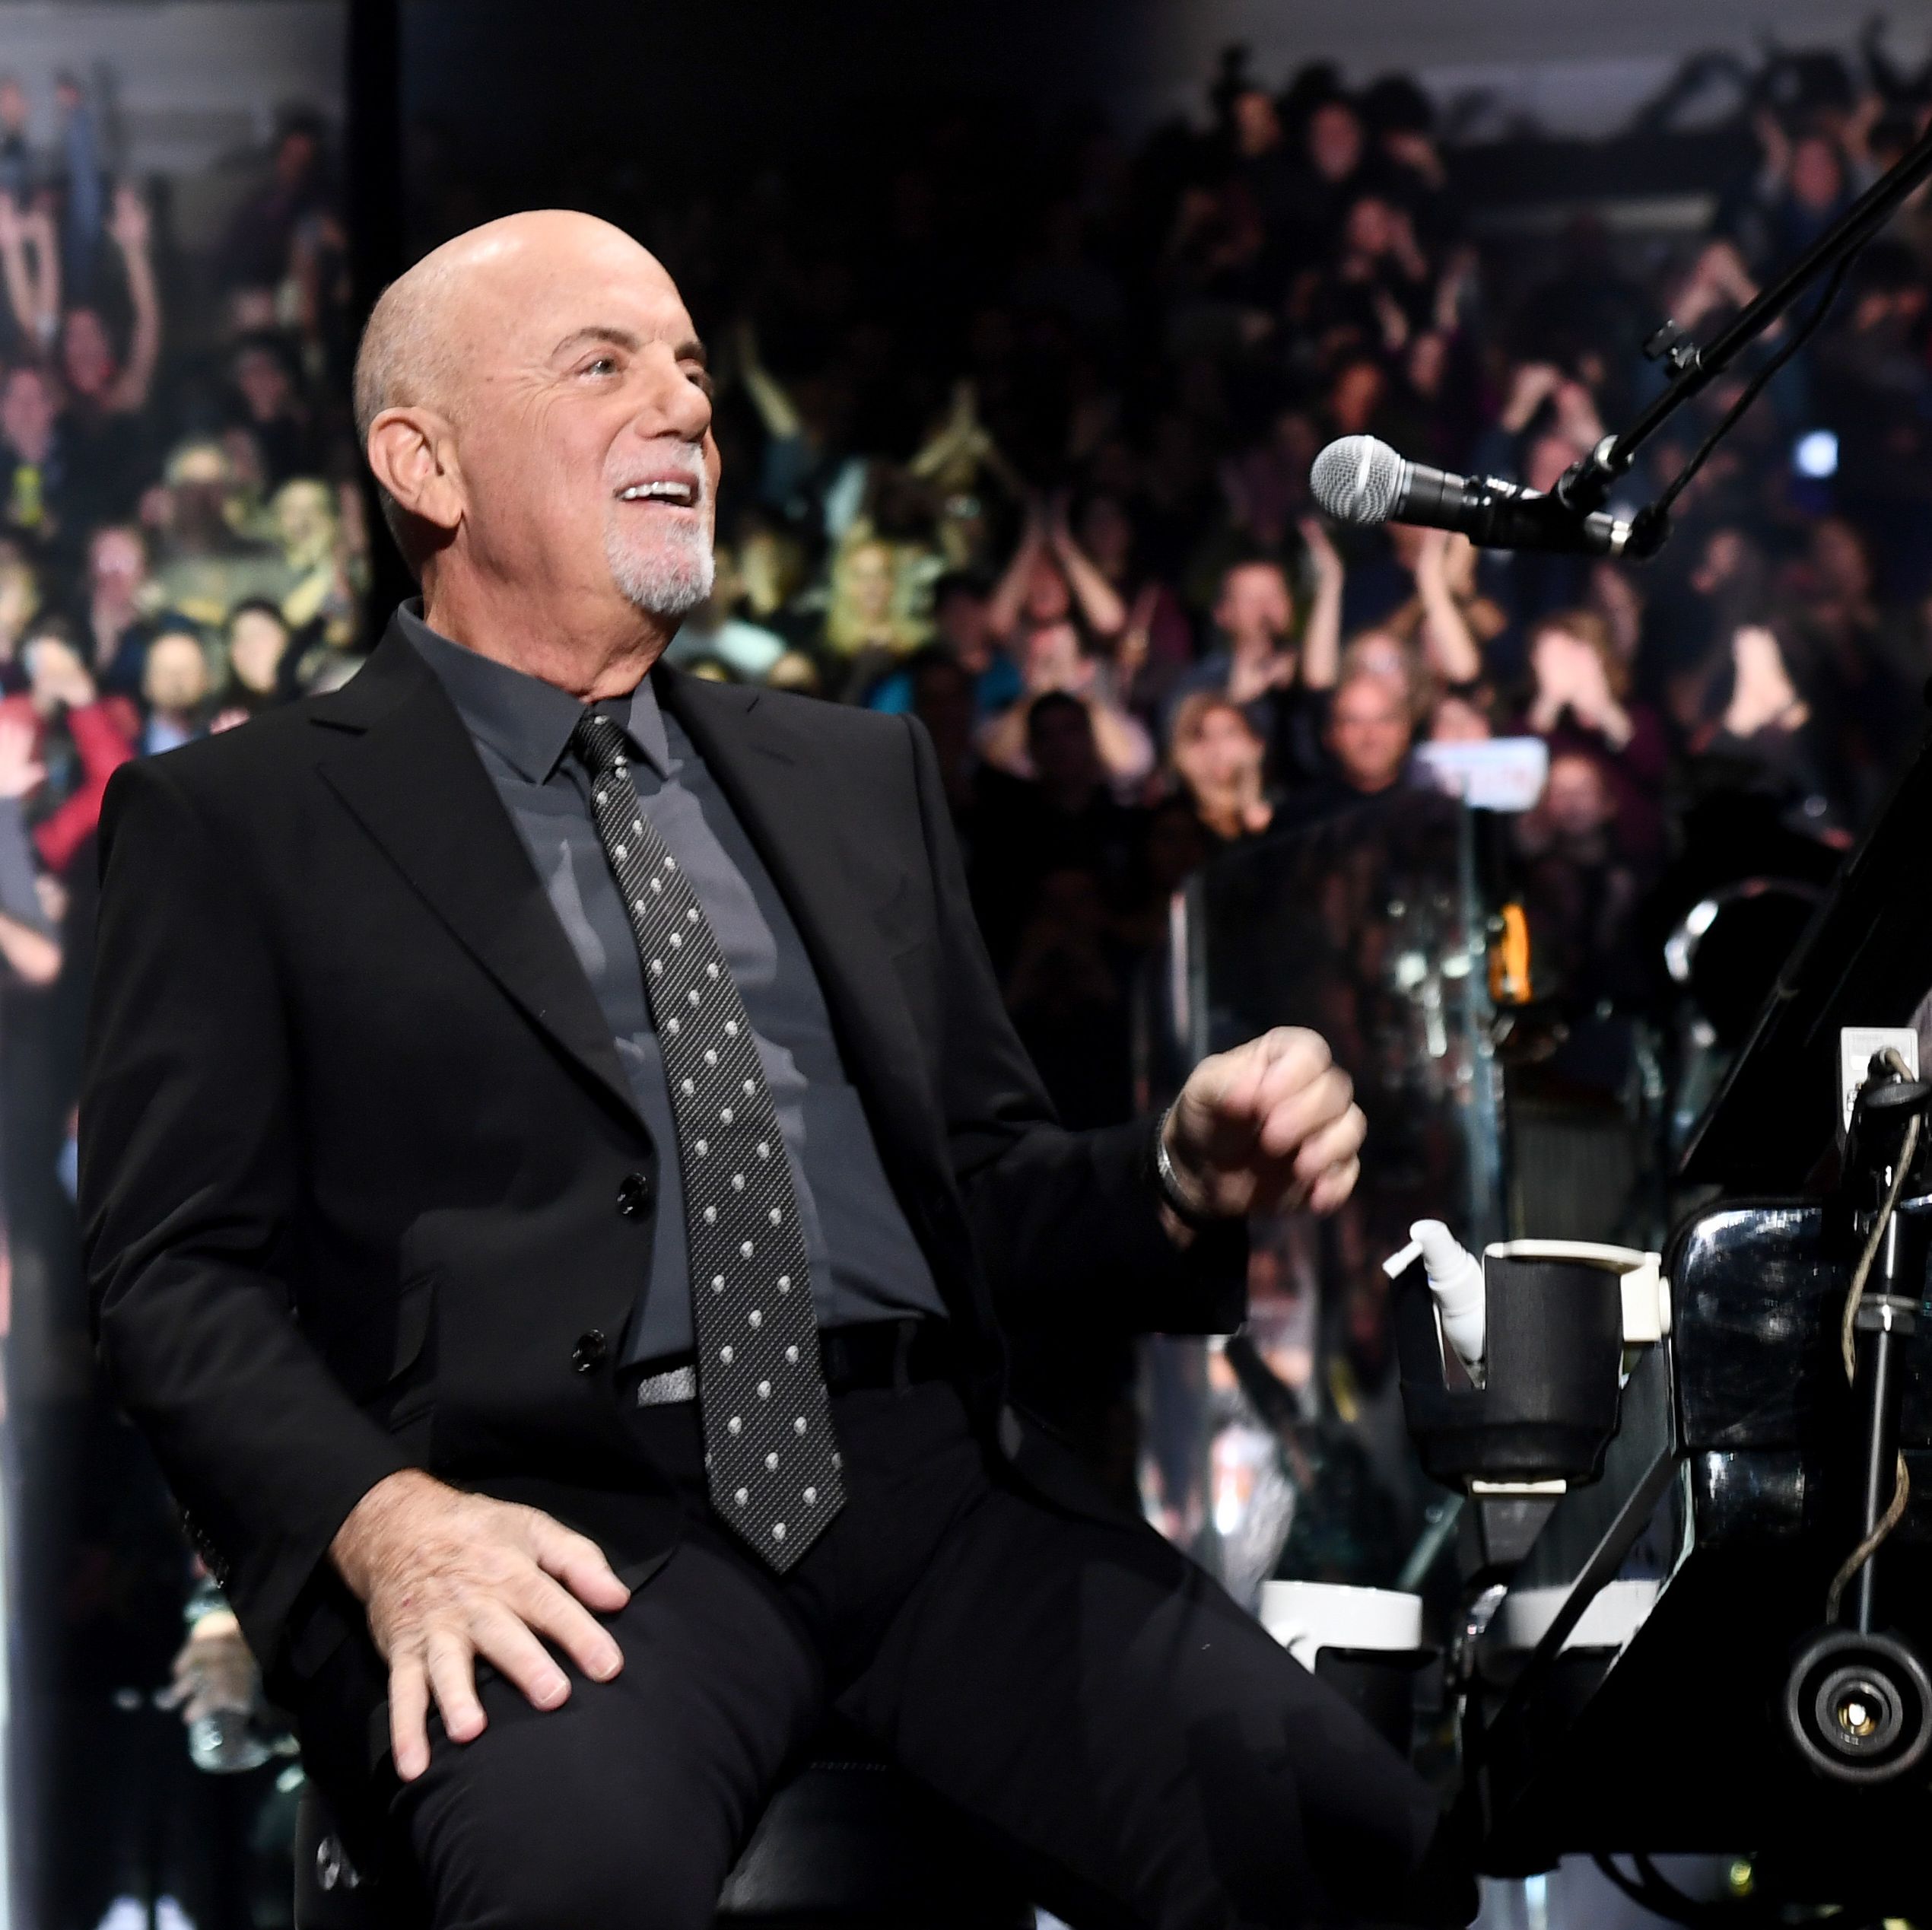 Billy Joel Reveals He Lost 50 Pounds After Undergoing Back Surgery Earlier This Year